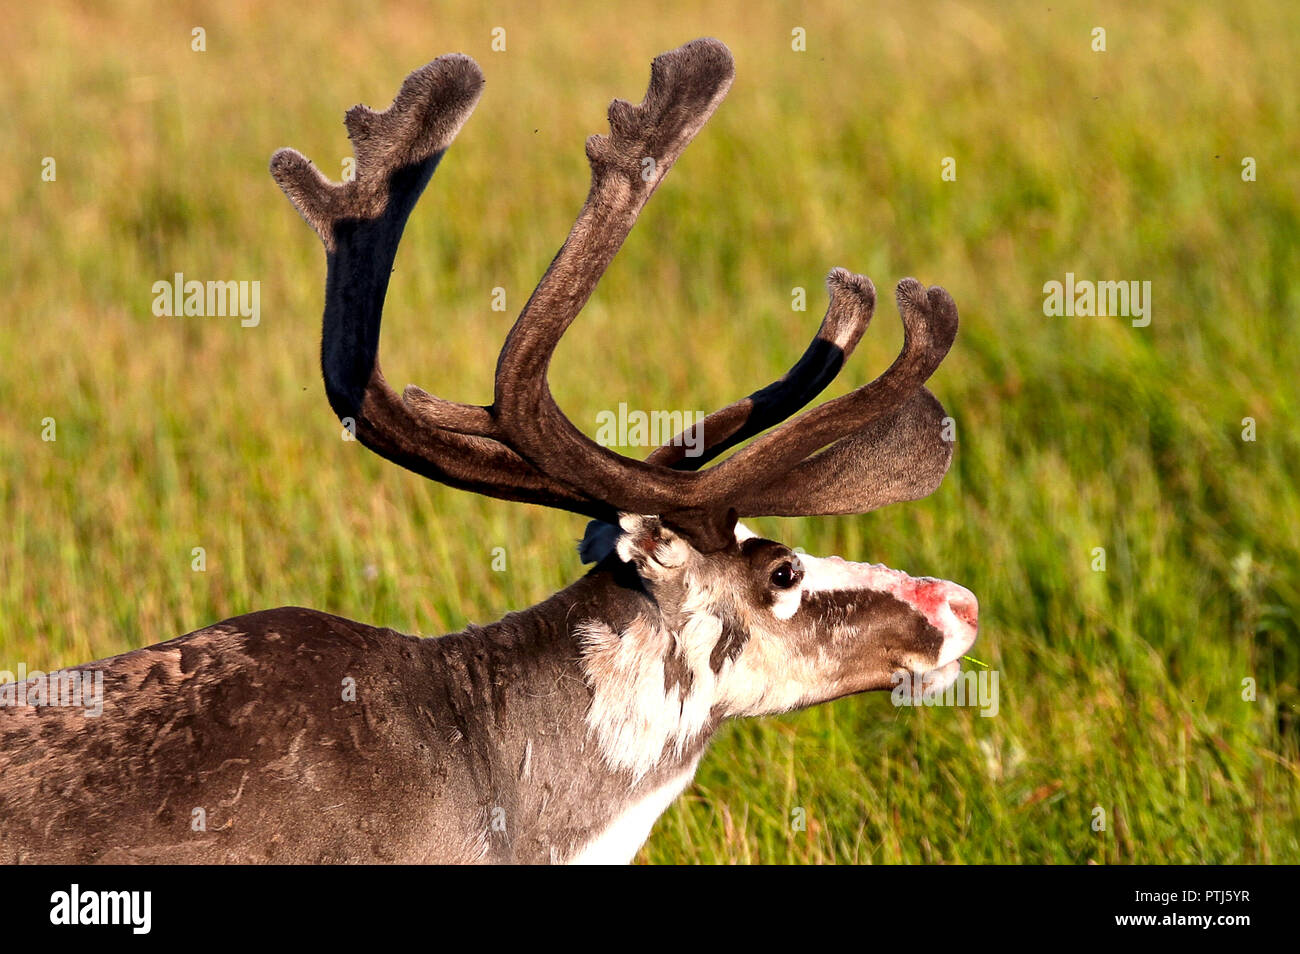 A reindeer eating grass in Lapland, Finland Stock Photo